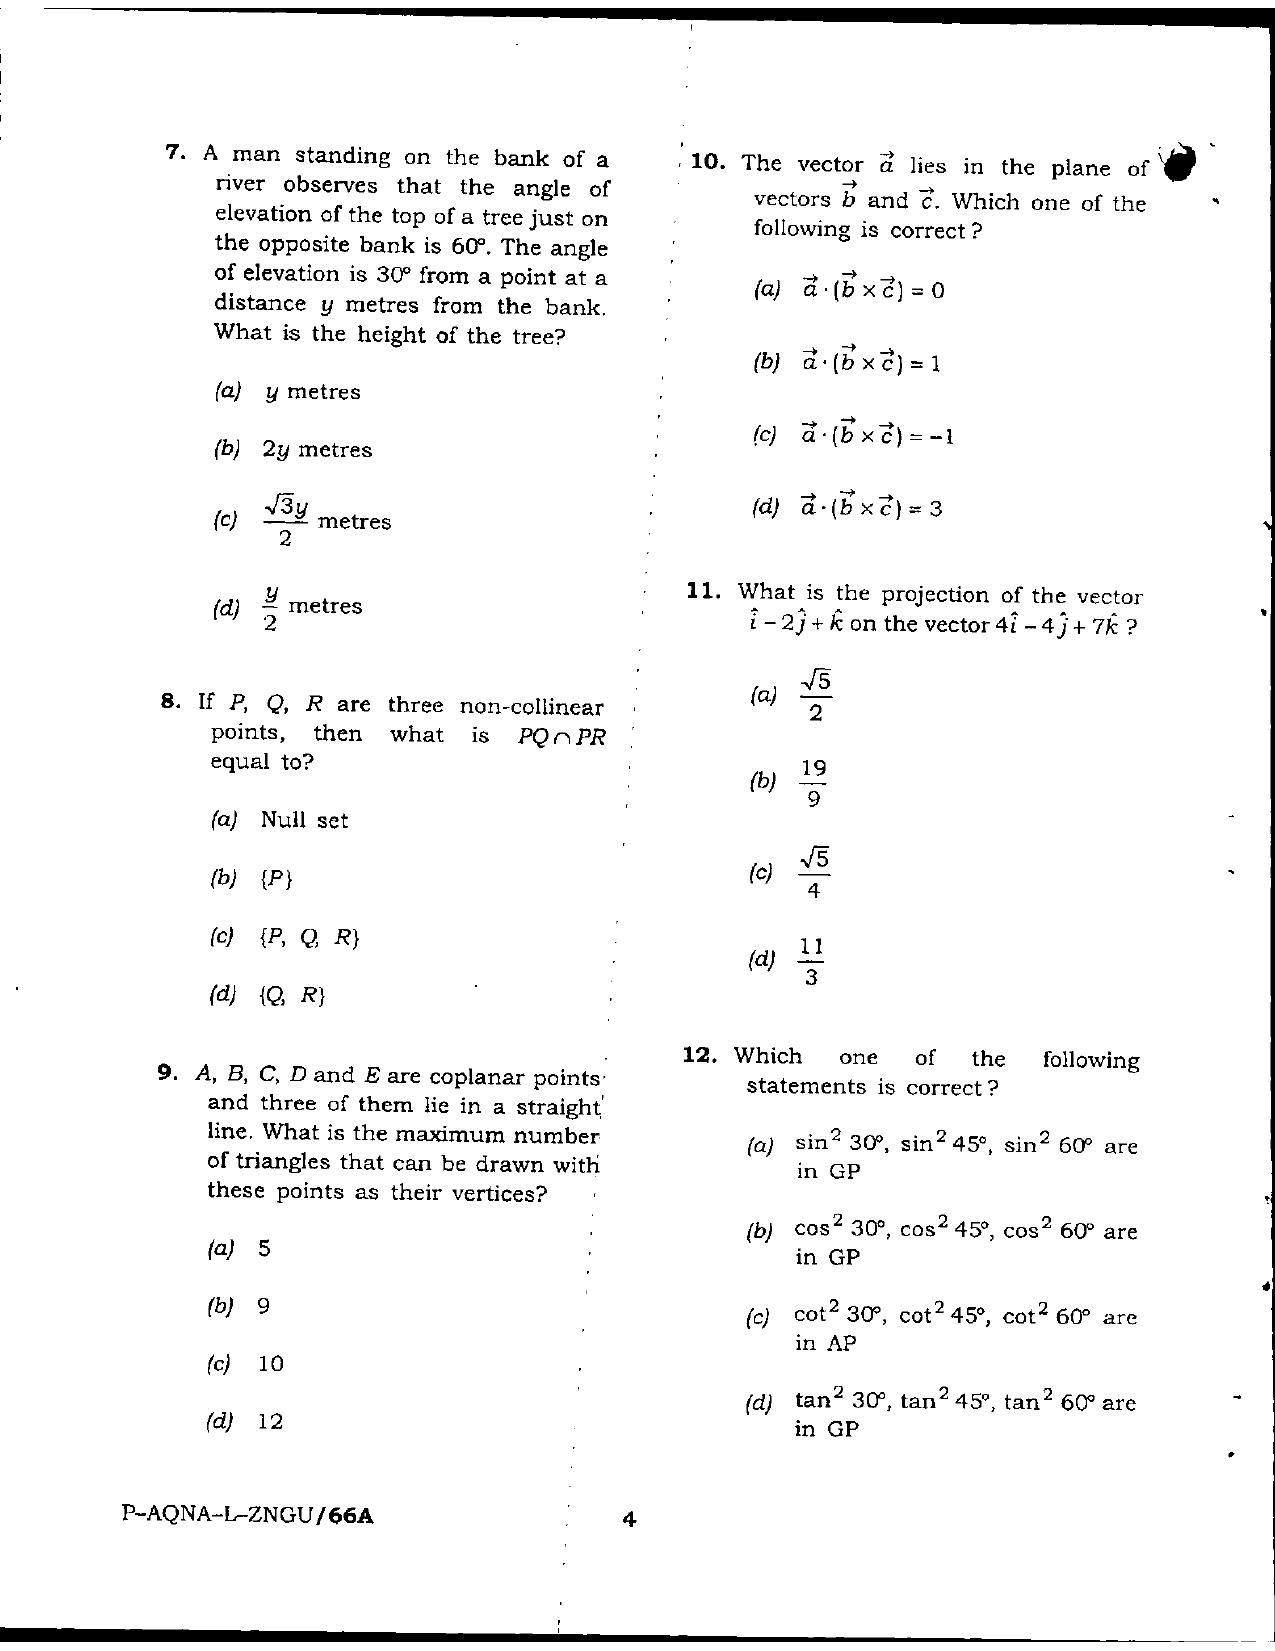 Jammu Kashmir Accounts Assistant Previous Papers for Mathematics - Page 4